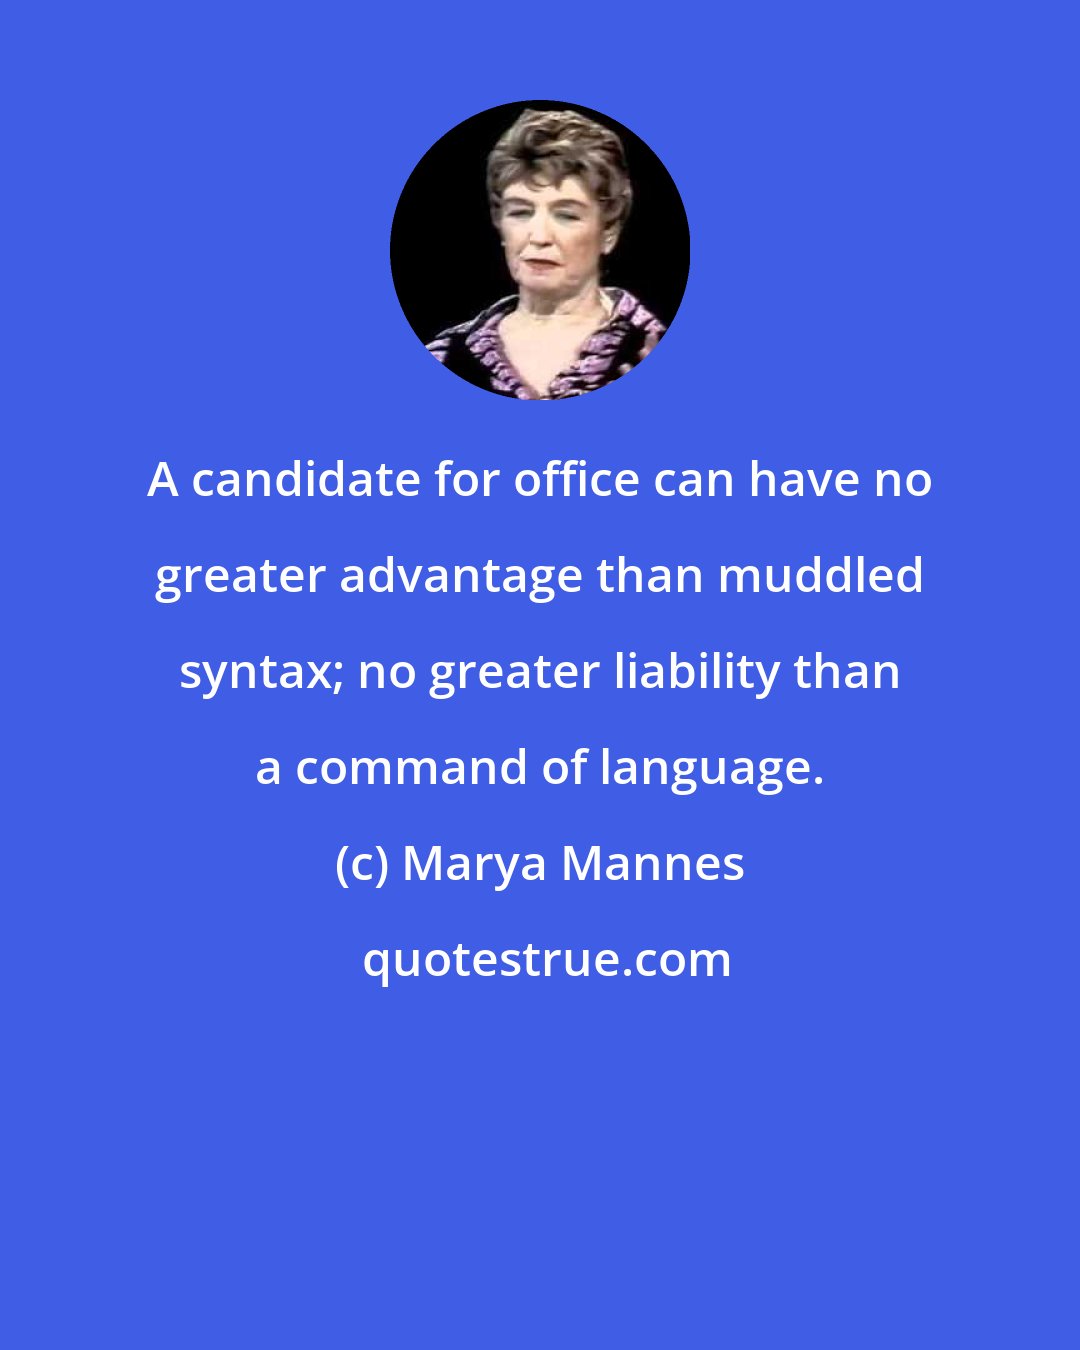 Marya Mannes: A candidate for office can have no greater advantage than muddled syntax; no greater liability than a command of language.